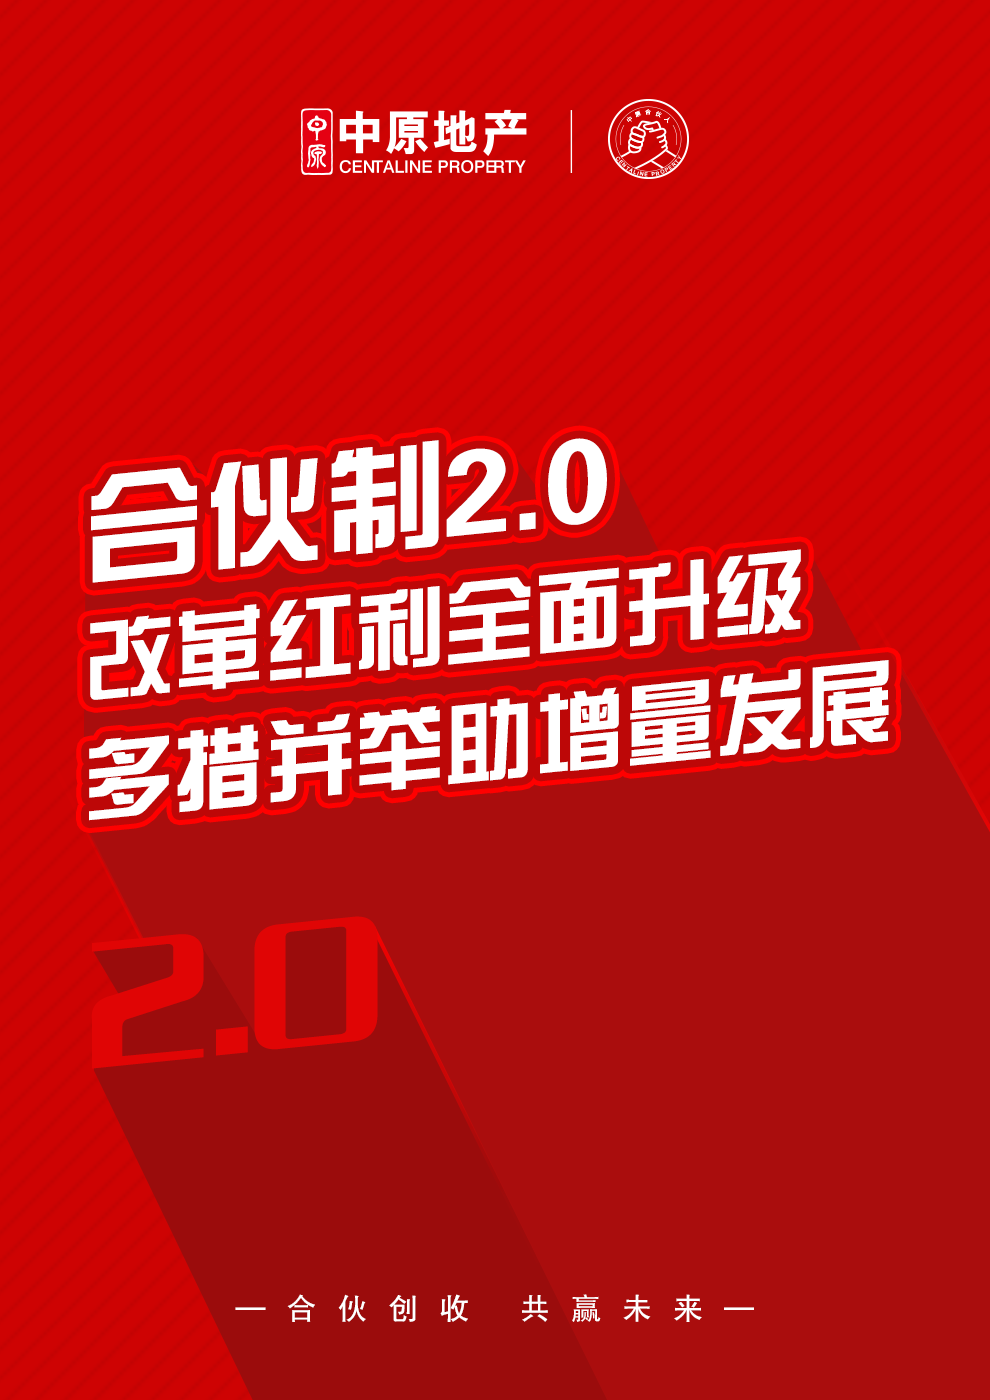 WeChat 圖片_20200824101910-4.png